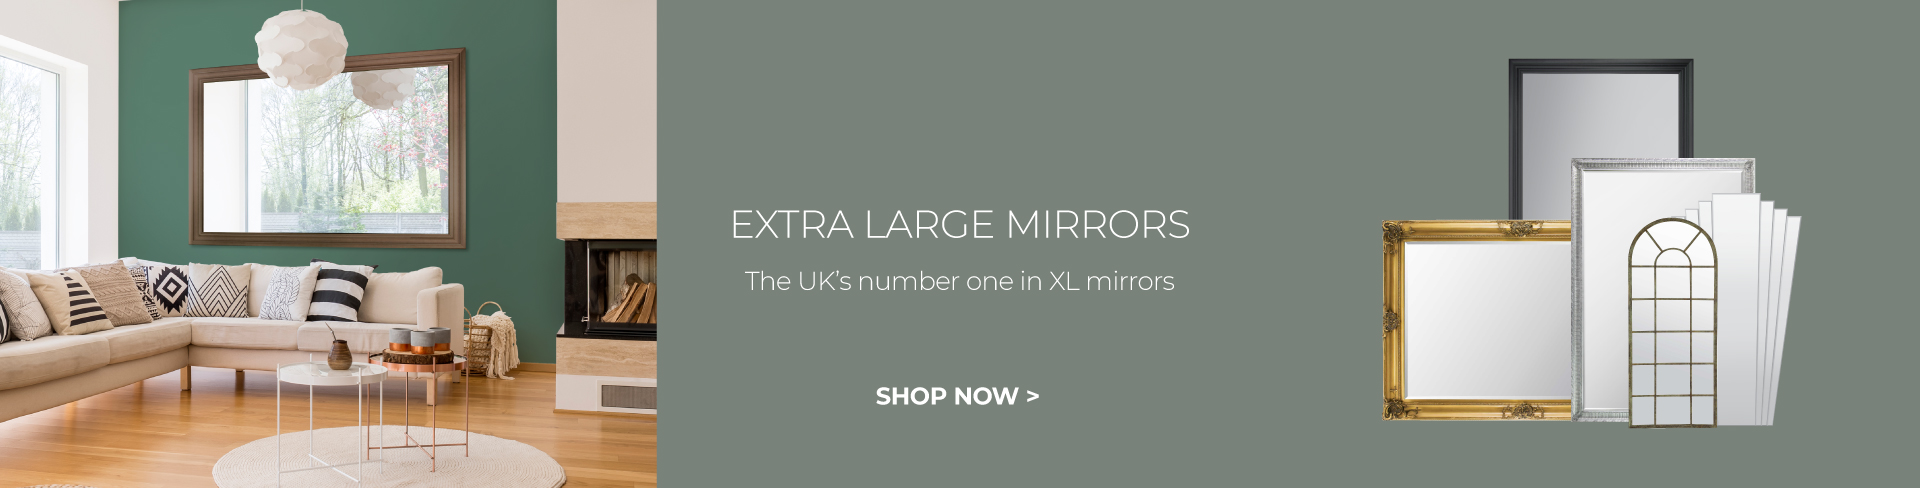 Large Mirrors For Sale Shop Full Length To Extra Large Mirrors